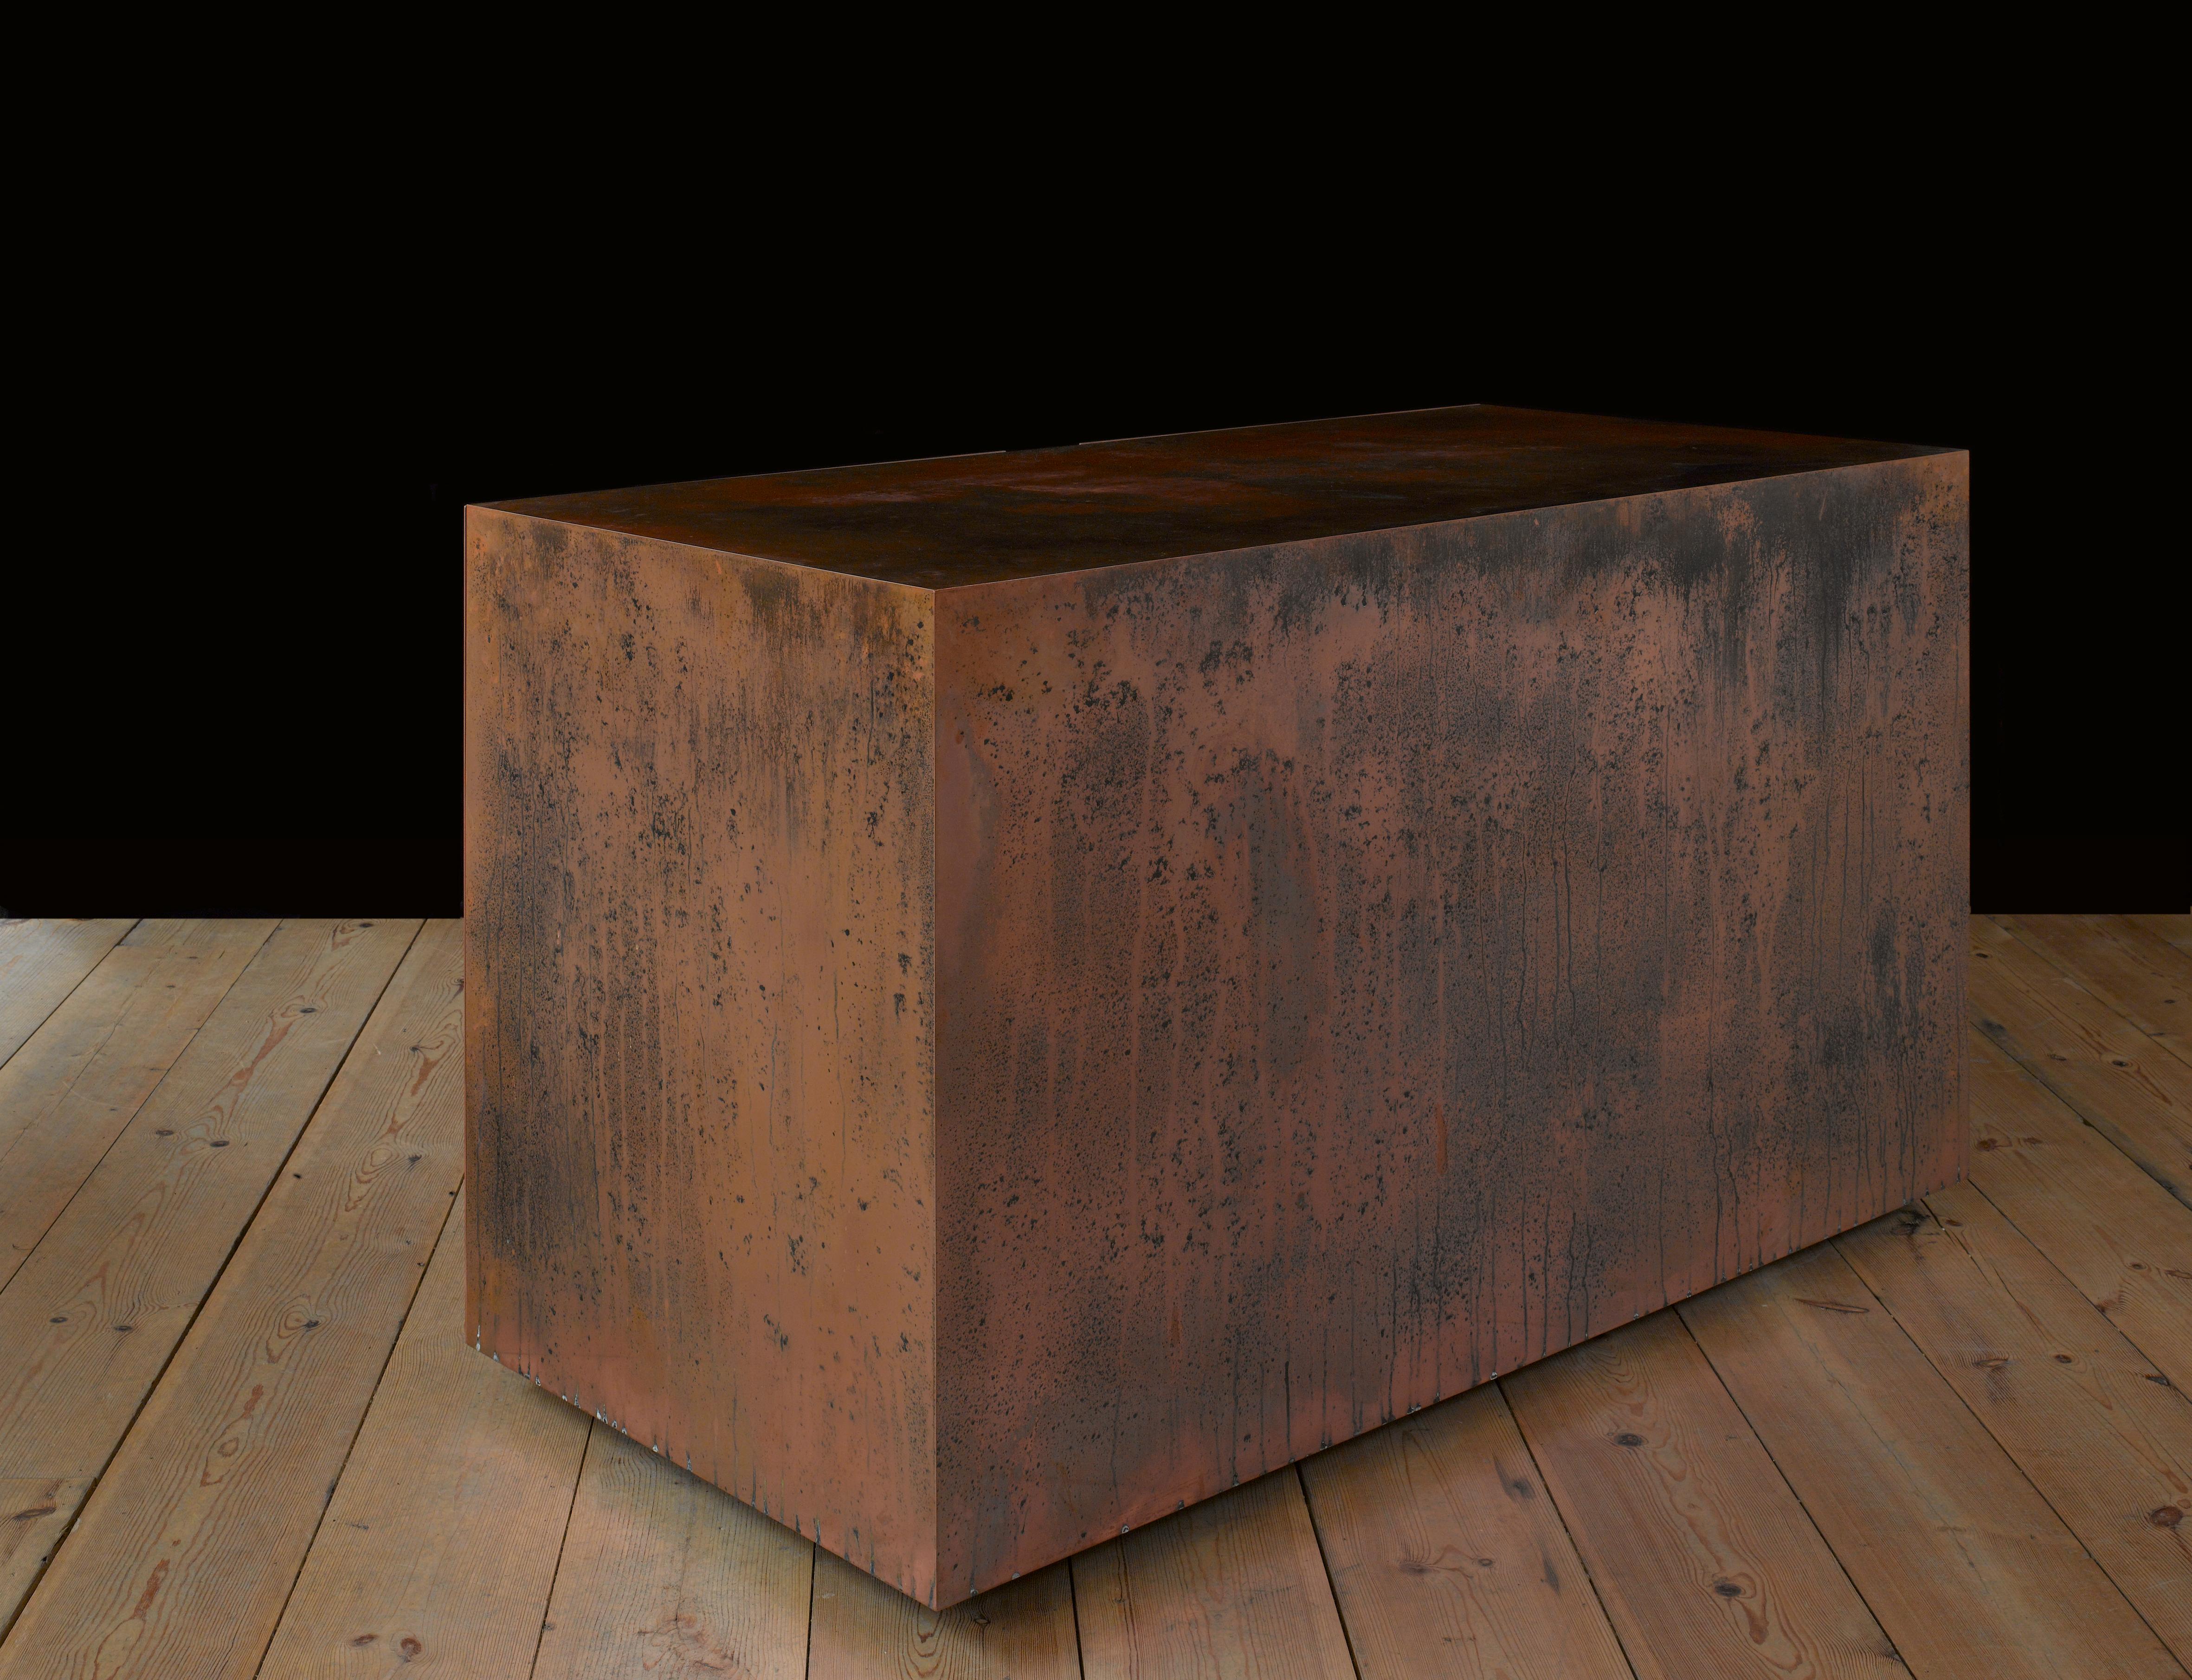 Initial appearance is of a patinated copper form but when the back is pulled out you reveal a walnut desk with drawers, a cupboard and a leather upholstered seat with back rest.
The copper is 6mm solid plate and all drawers, internal door and